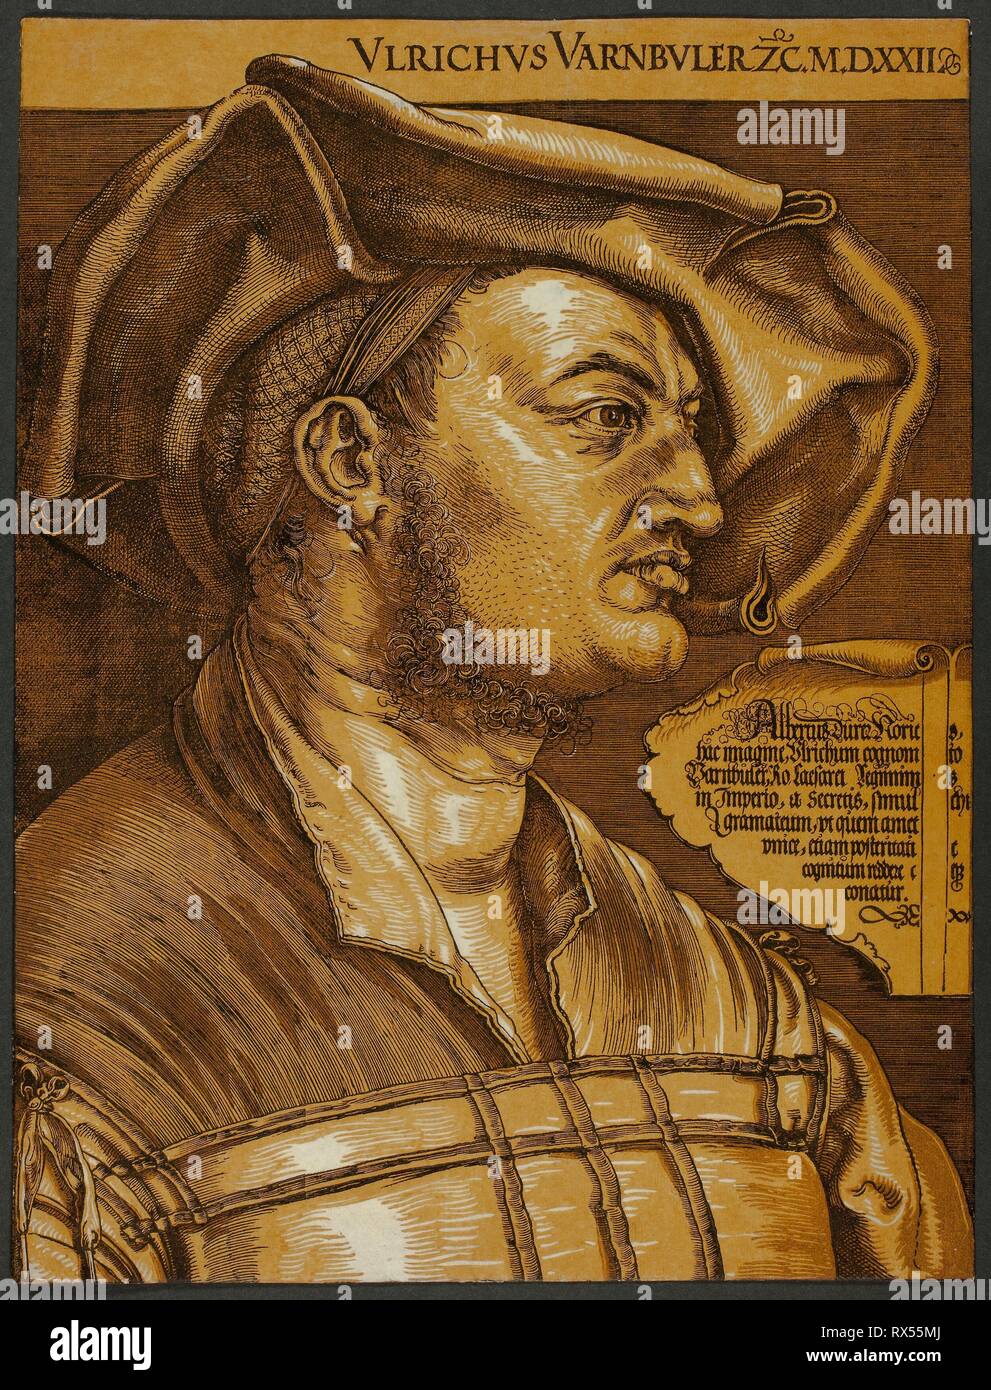 Ulrich Varnbüler. Albrecht Dürer (German, 1471-1528); printed by Willem Janszoon Blaeu (Dutch, 1571-1638). Date: 1522. Dimensions: 430 x 327 mm (image/sheet, trimmed within plate mark). Woodcut in black on ivory laid paper with added brown and sepia tone blocks. Origin: Germany. Museum: The Chicago Art Institute. Stock Photo